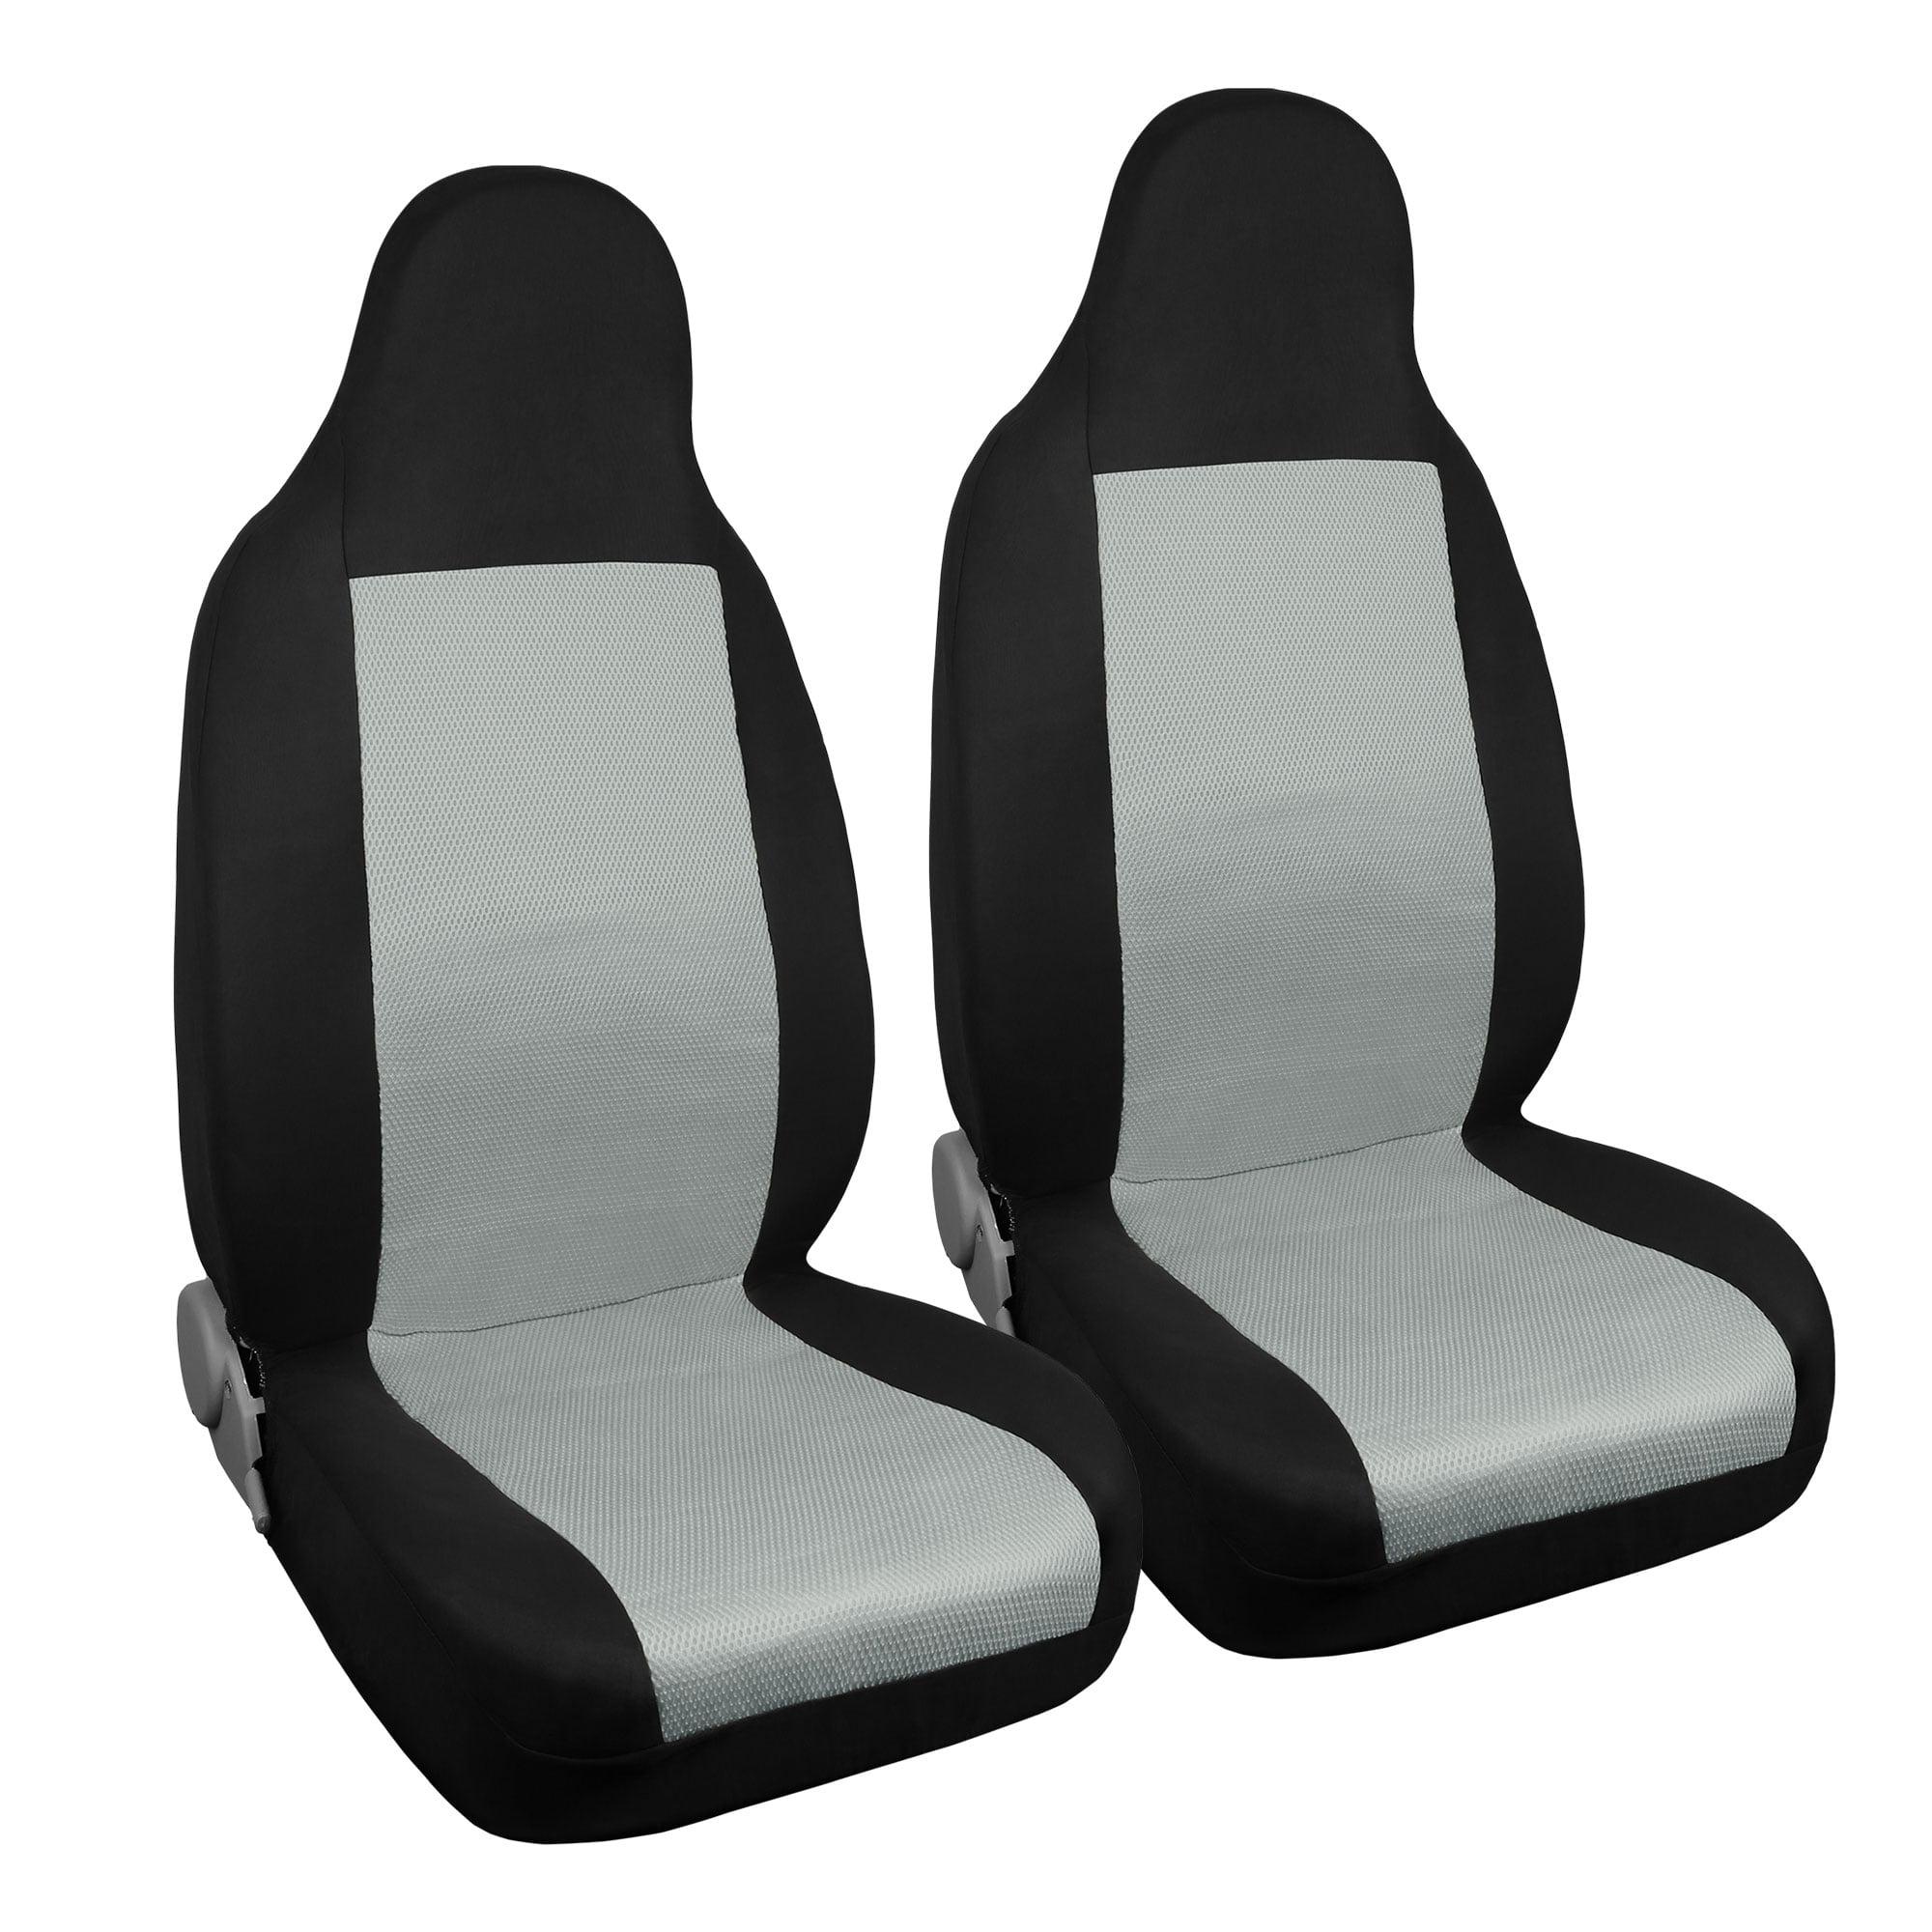 1/2PCS Seat Cover Set Front Integrated Bucket for Car Truck SUV Flat Cloth FOR